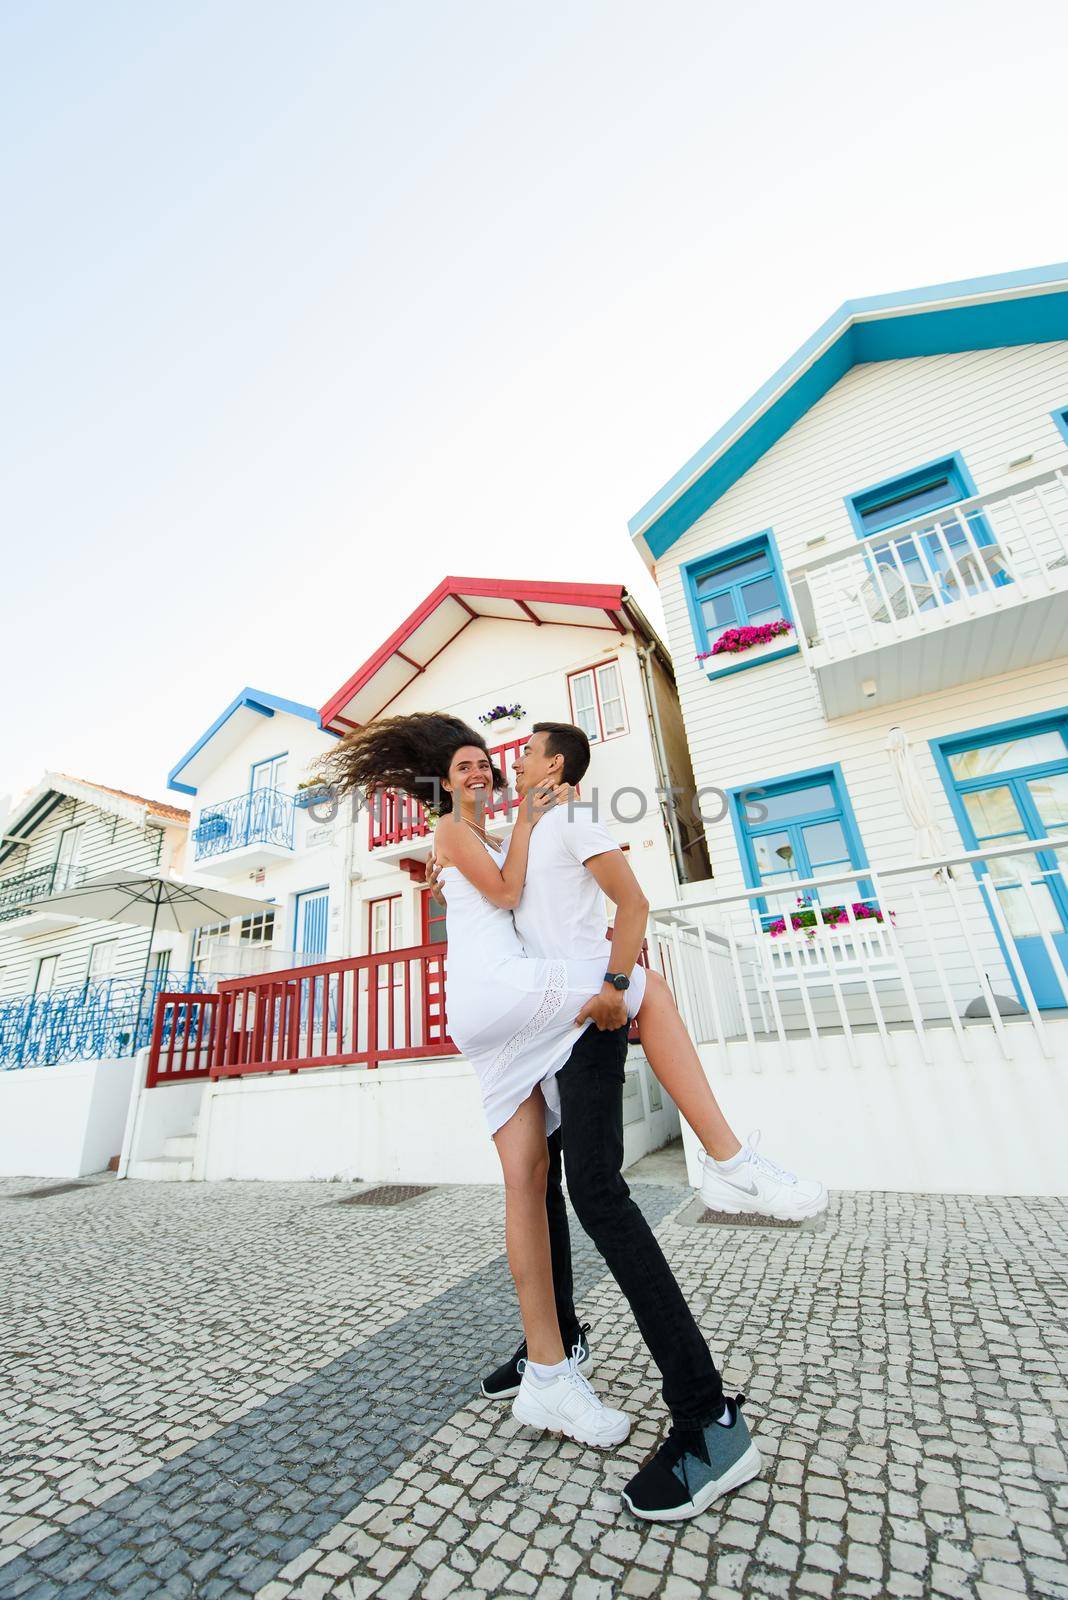 Young couple stays in tango pose and looks each others in Aveiro, Portugal near colourful and peaceful houses. Lifestyle. Having fun, by Rabizo